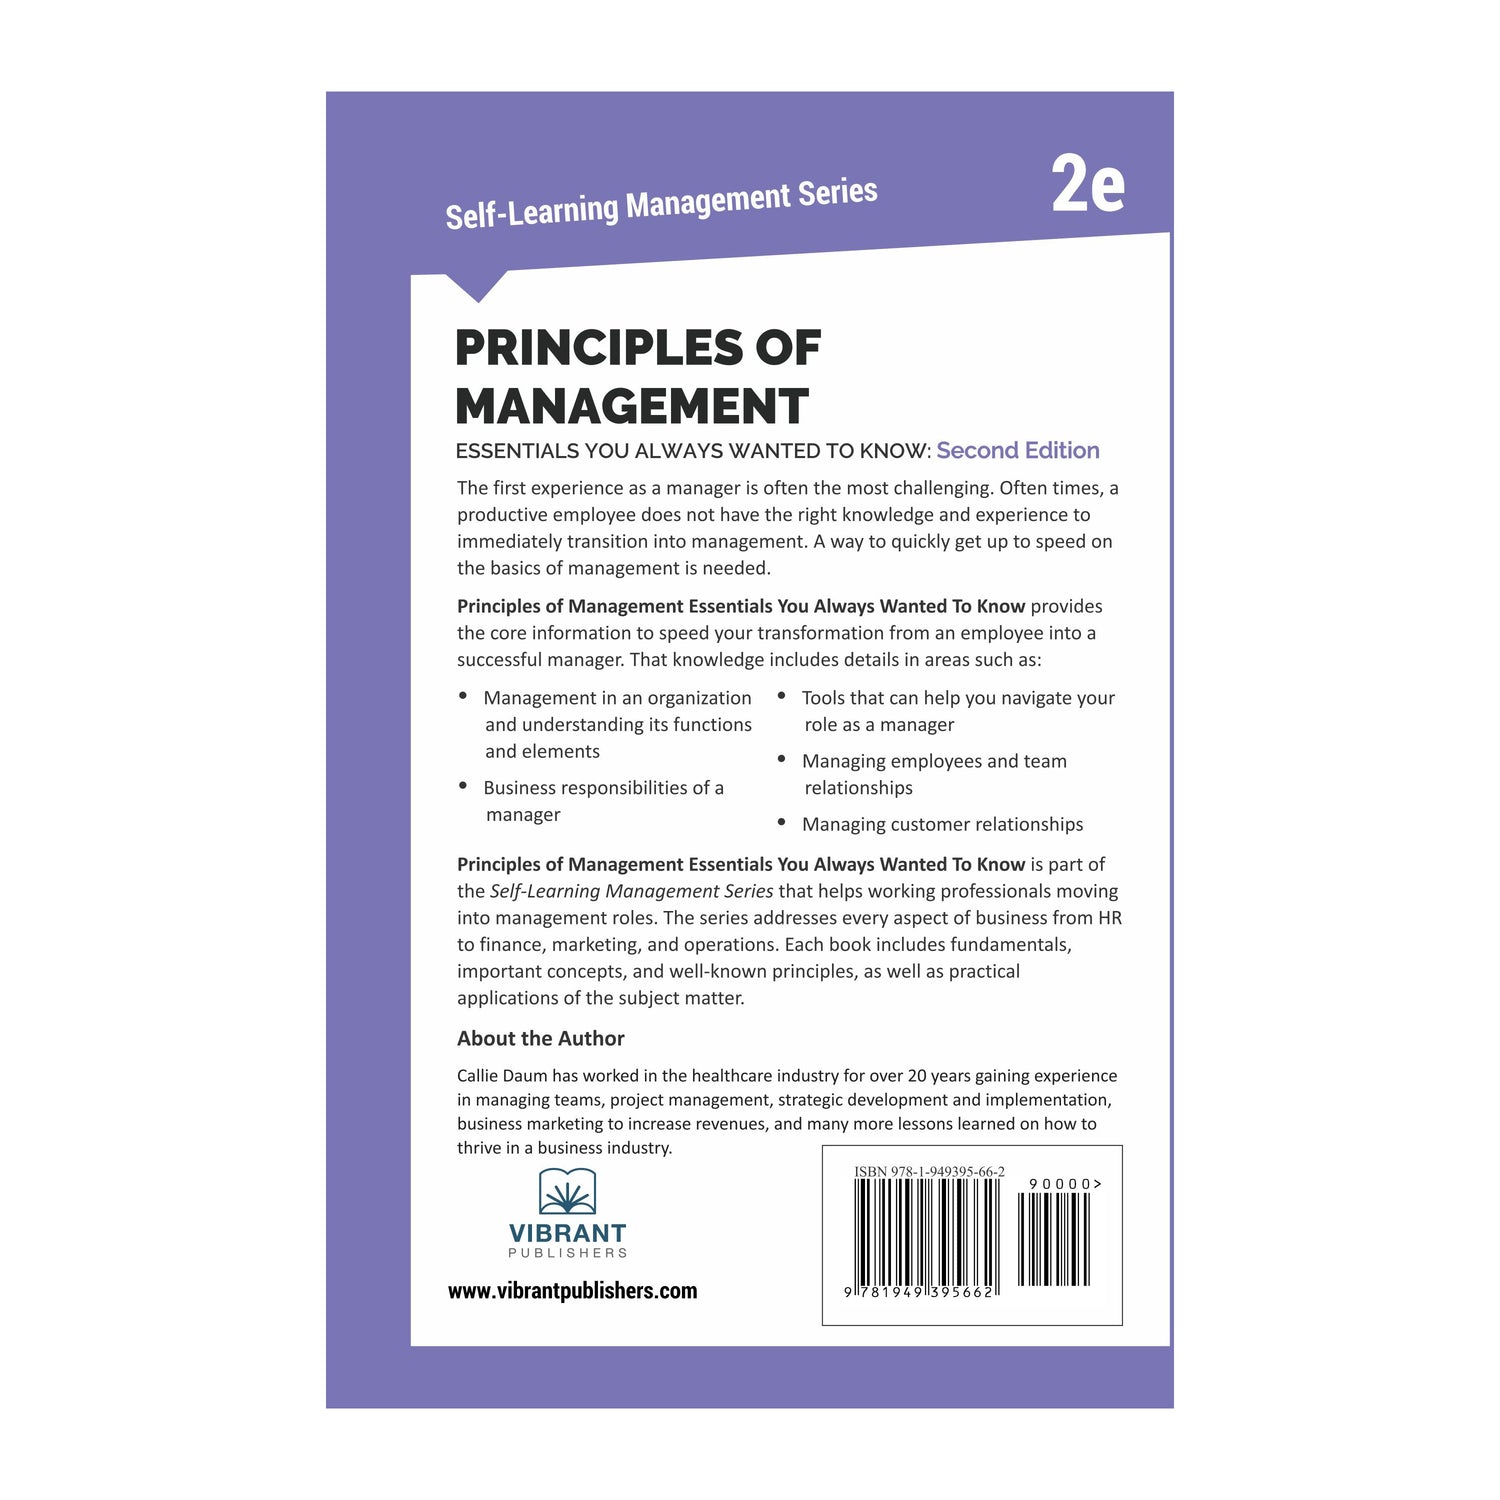 Principles of Management Essentials You Always Wanted To Know (2nd Edition)